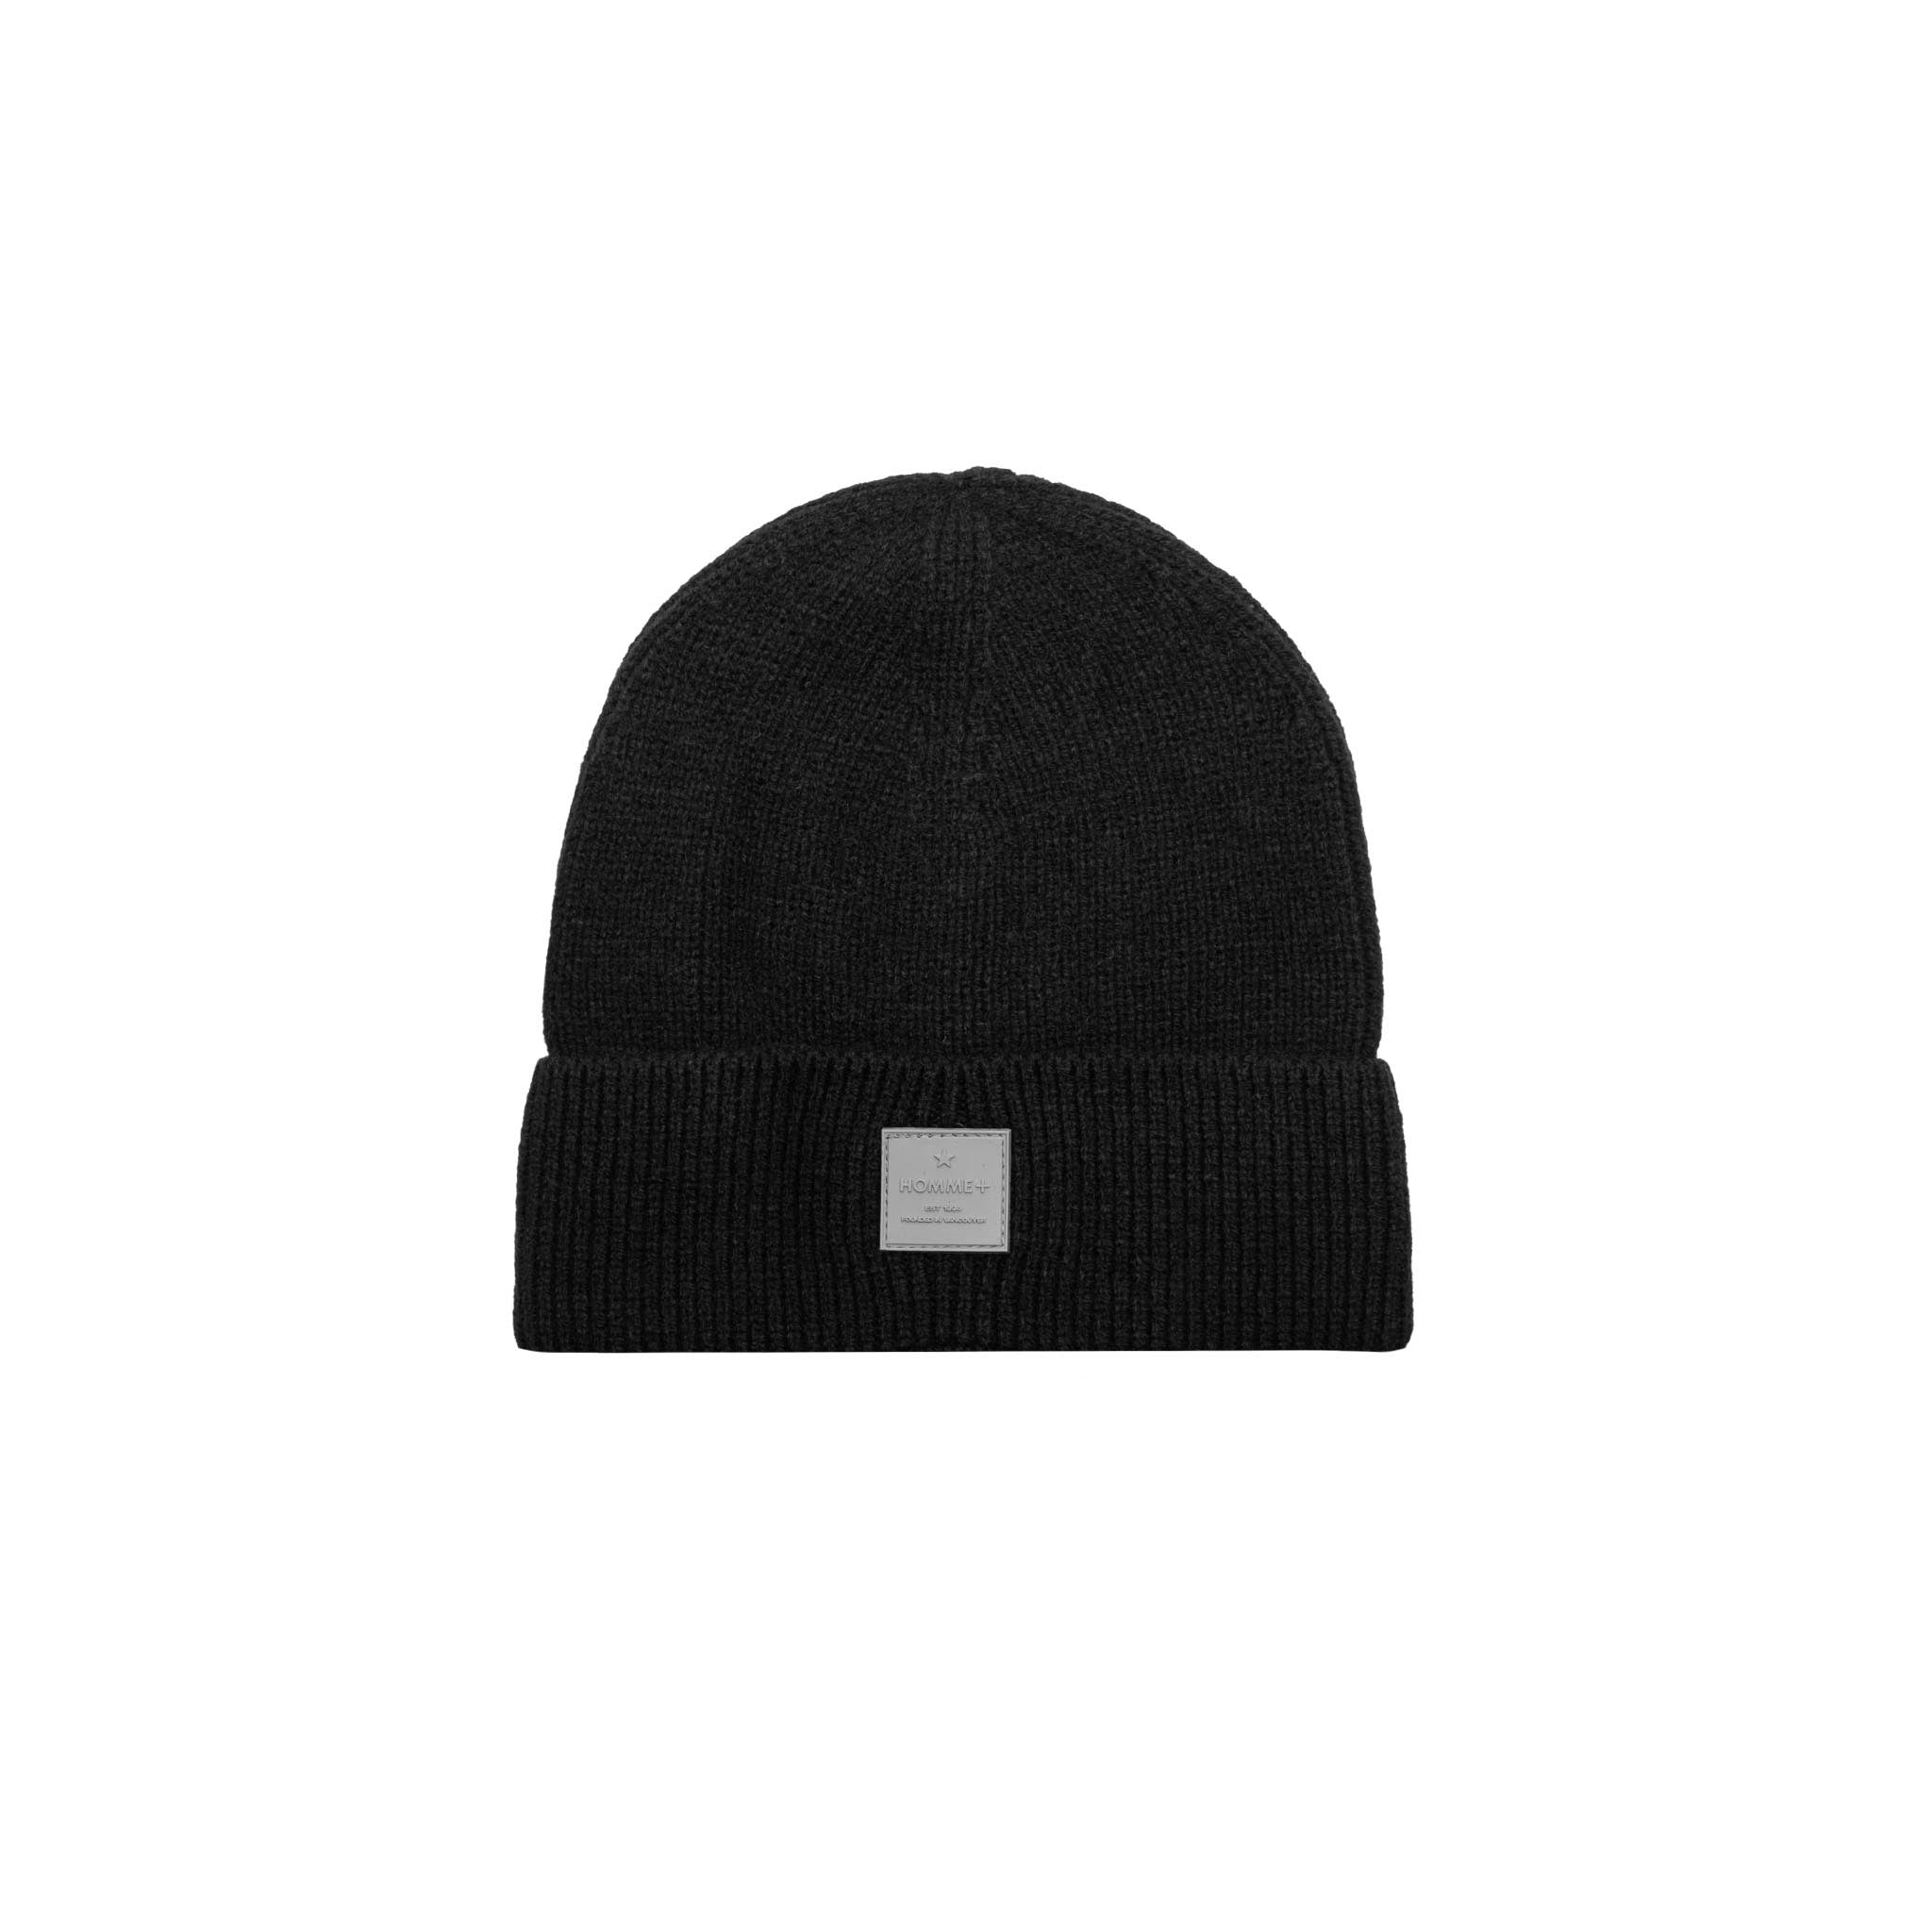 HOMME+ Rubber Patch Beanie Black/Grey